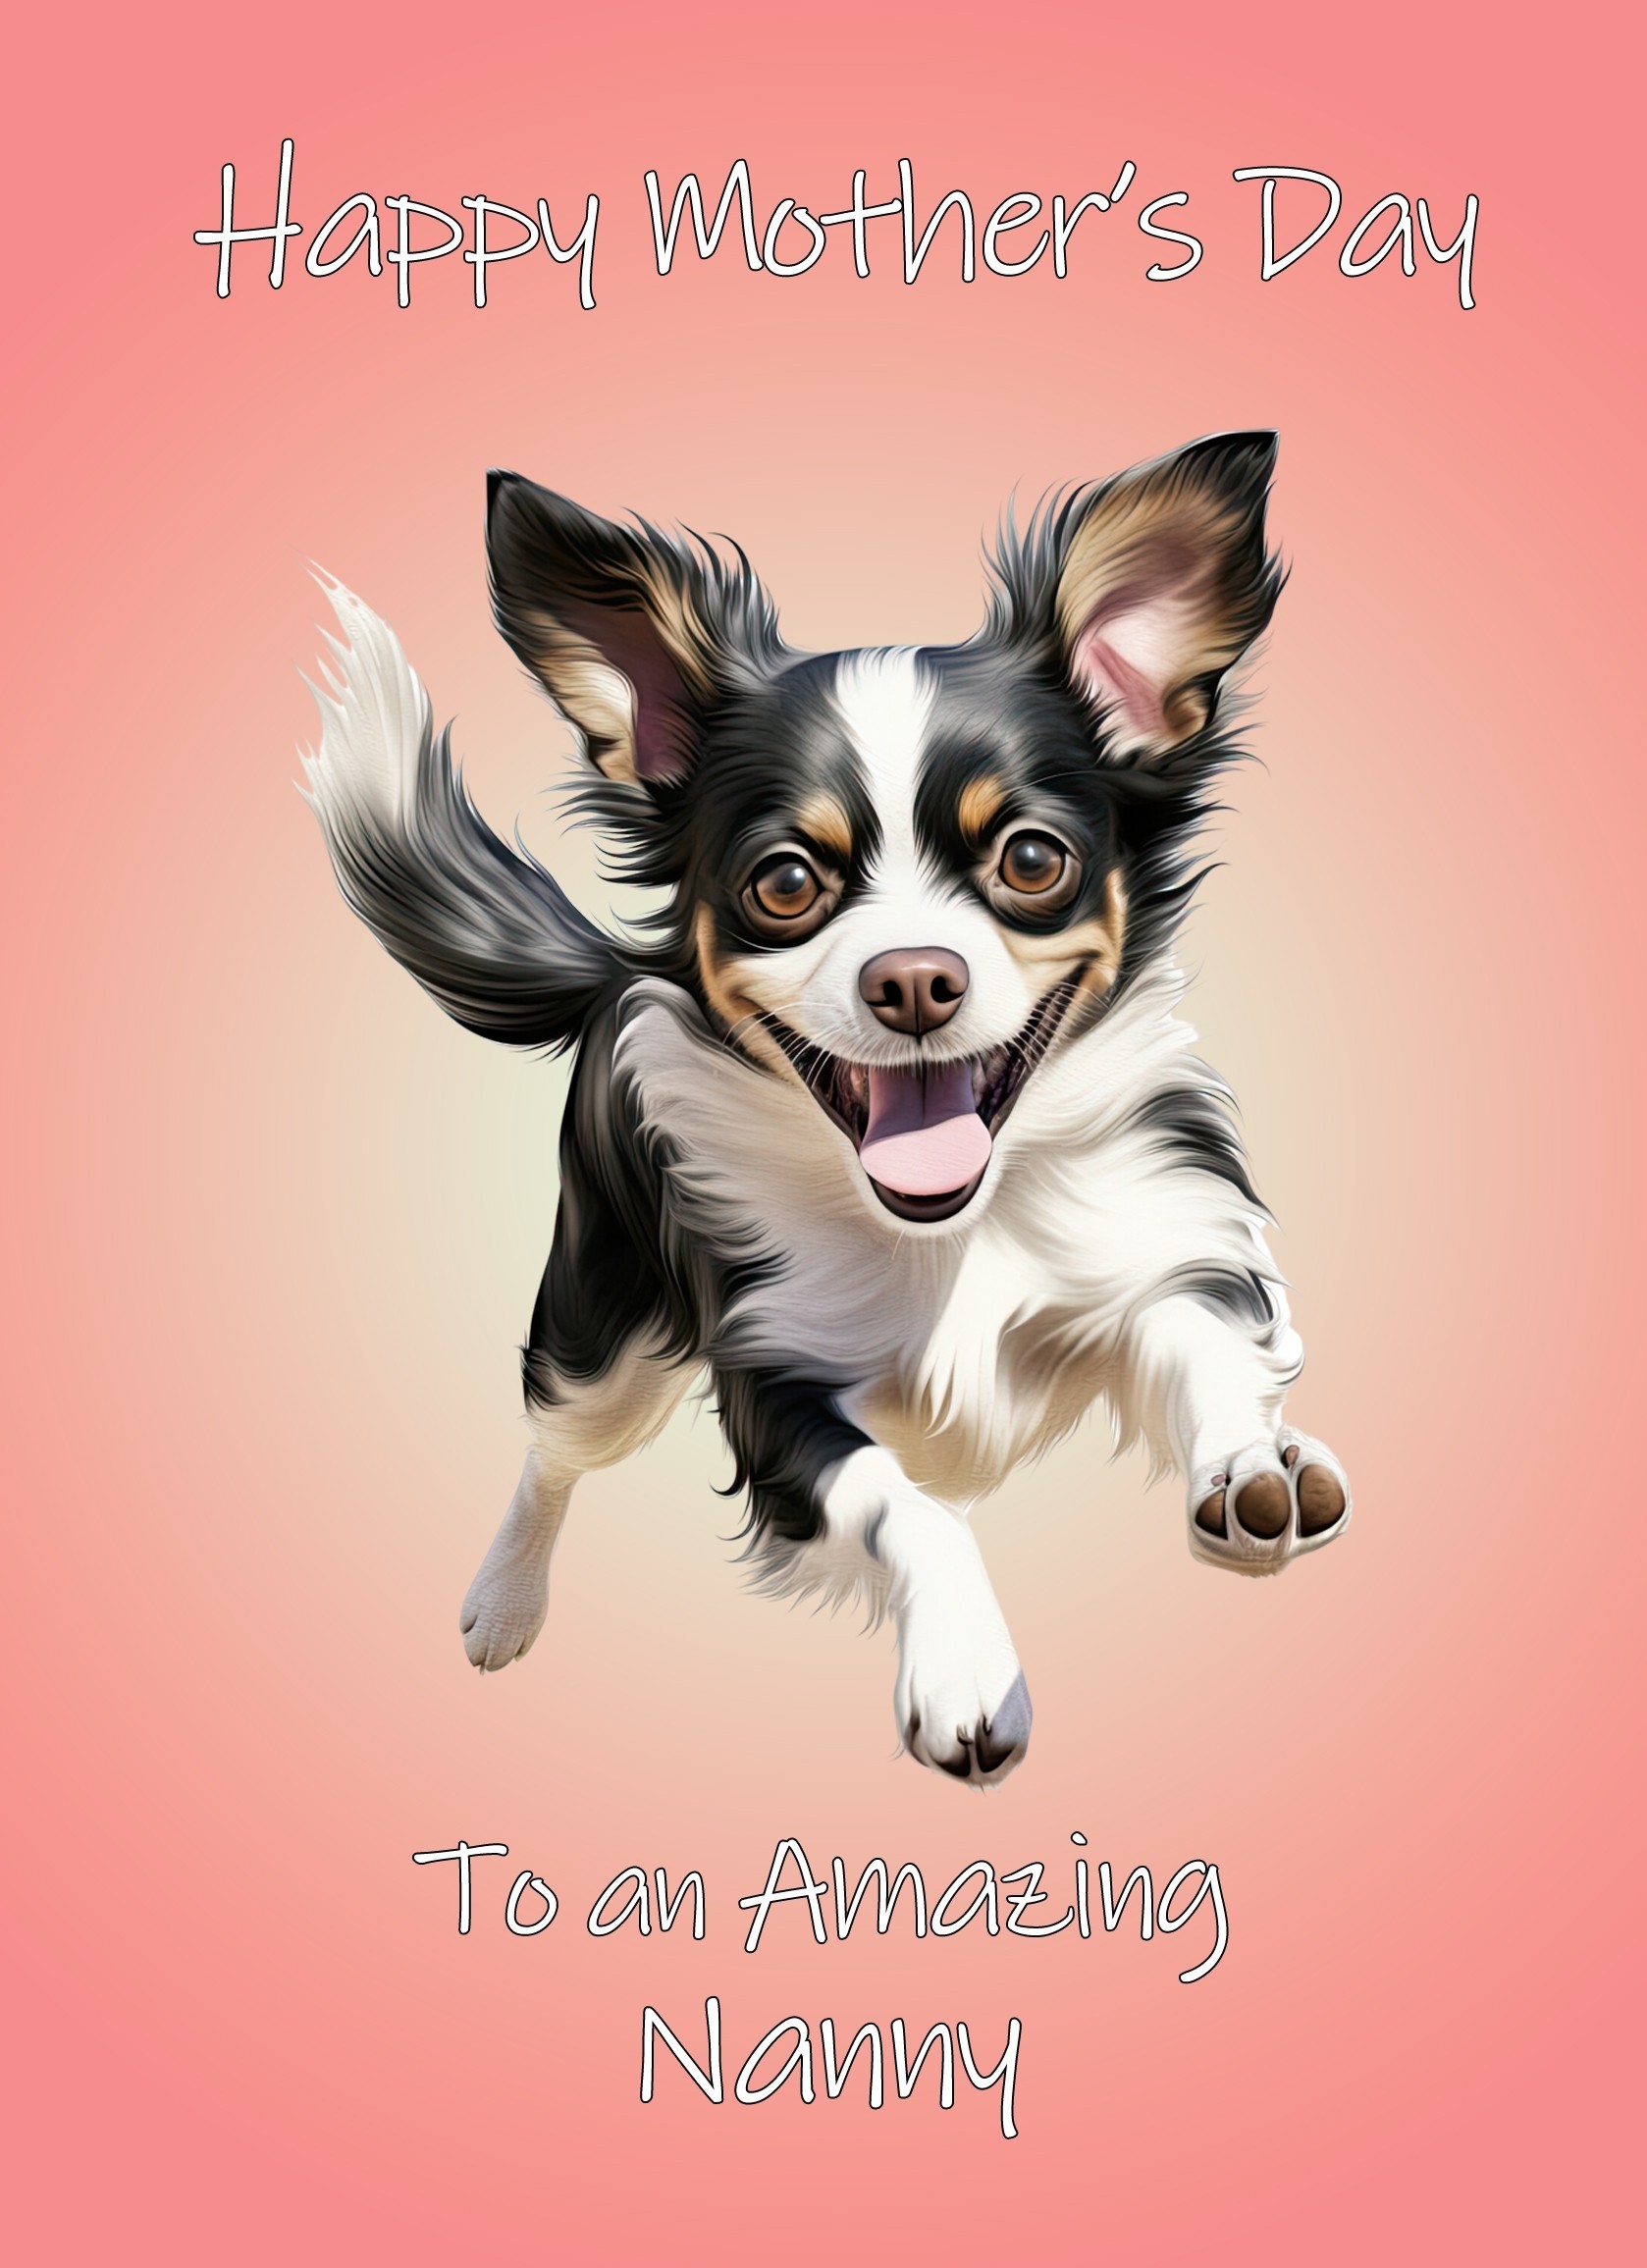 Chihuahua Dog Mothers Day Card For Nanny